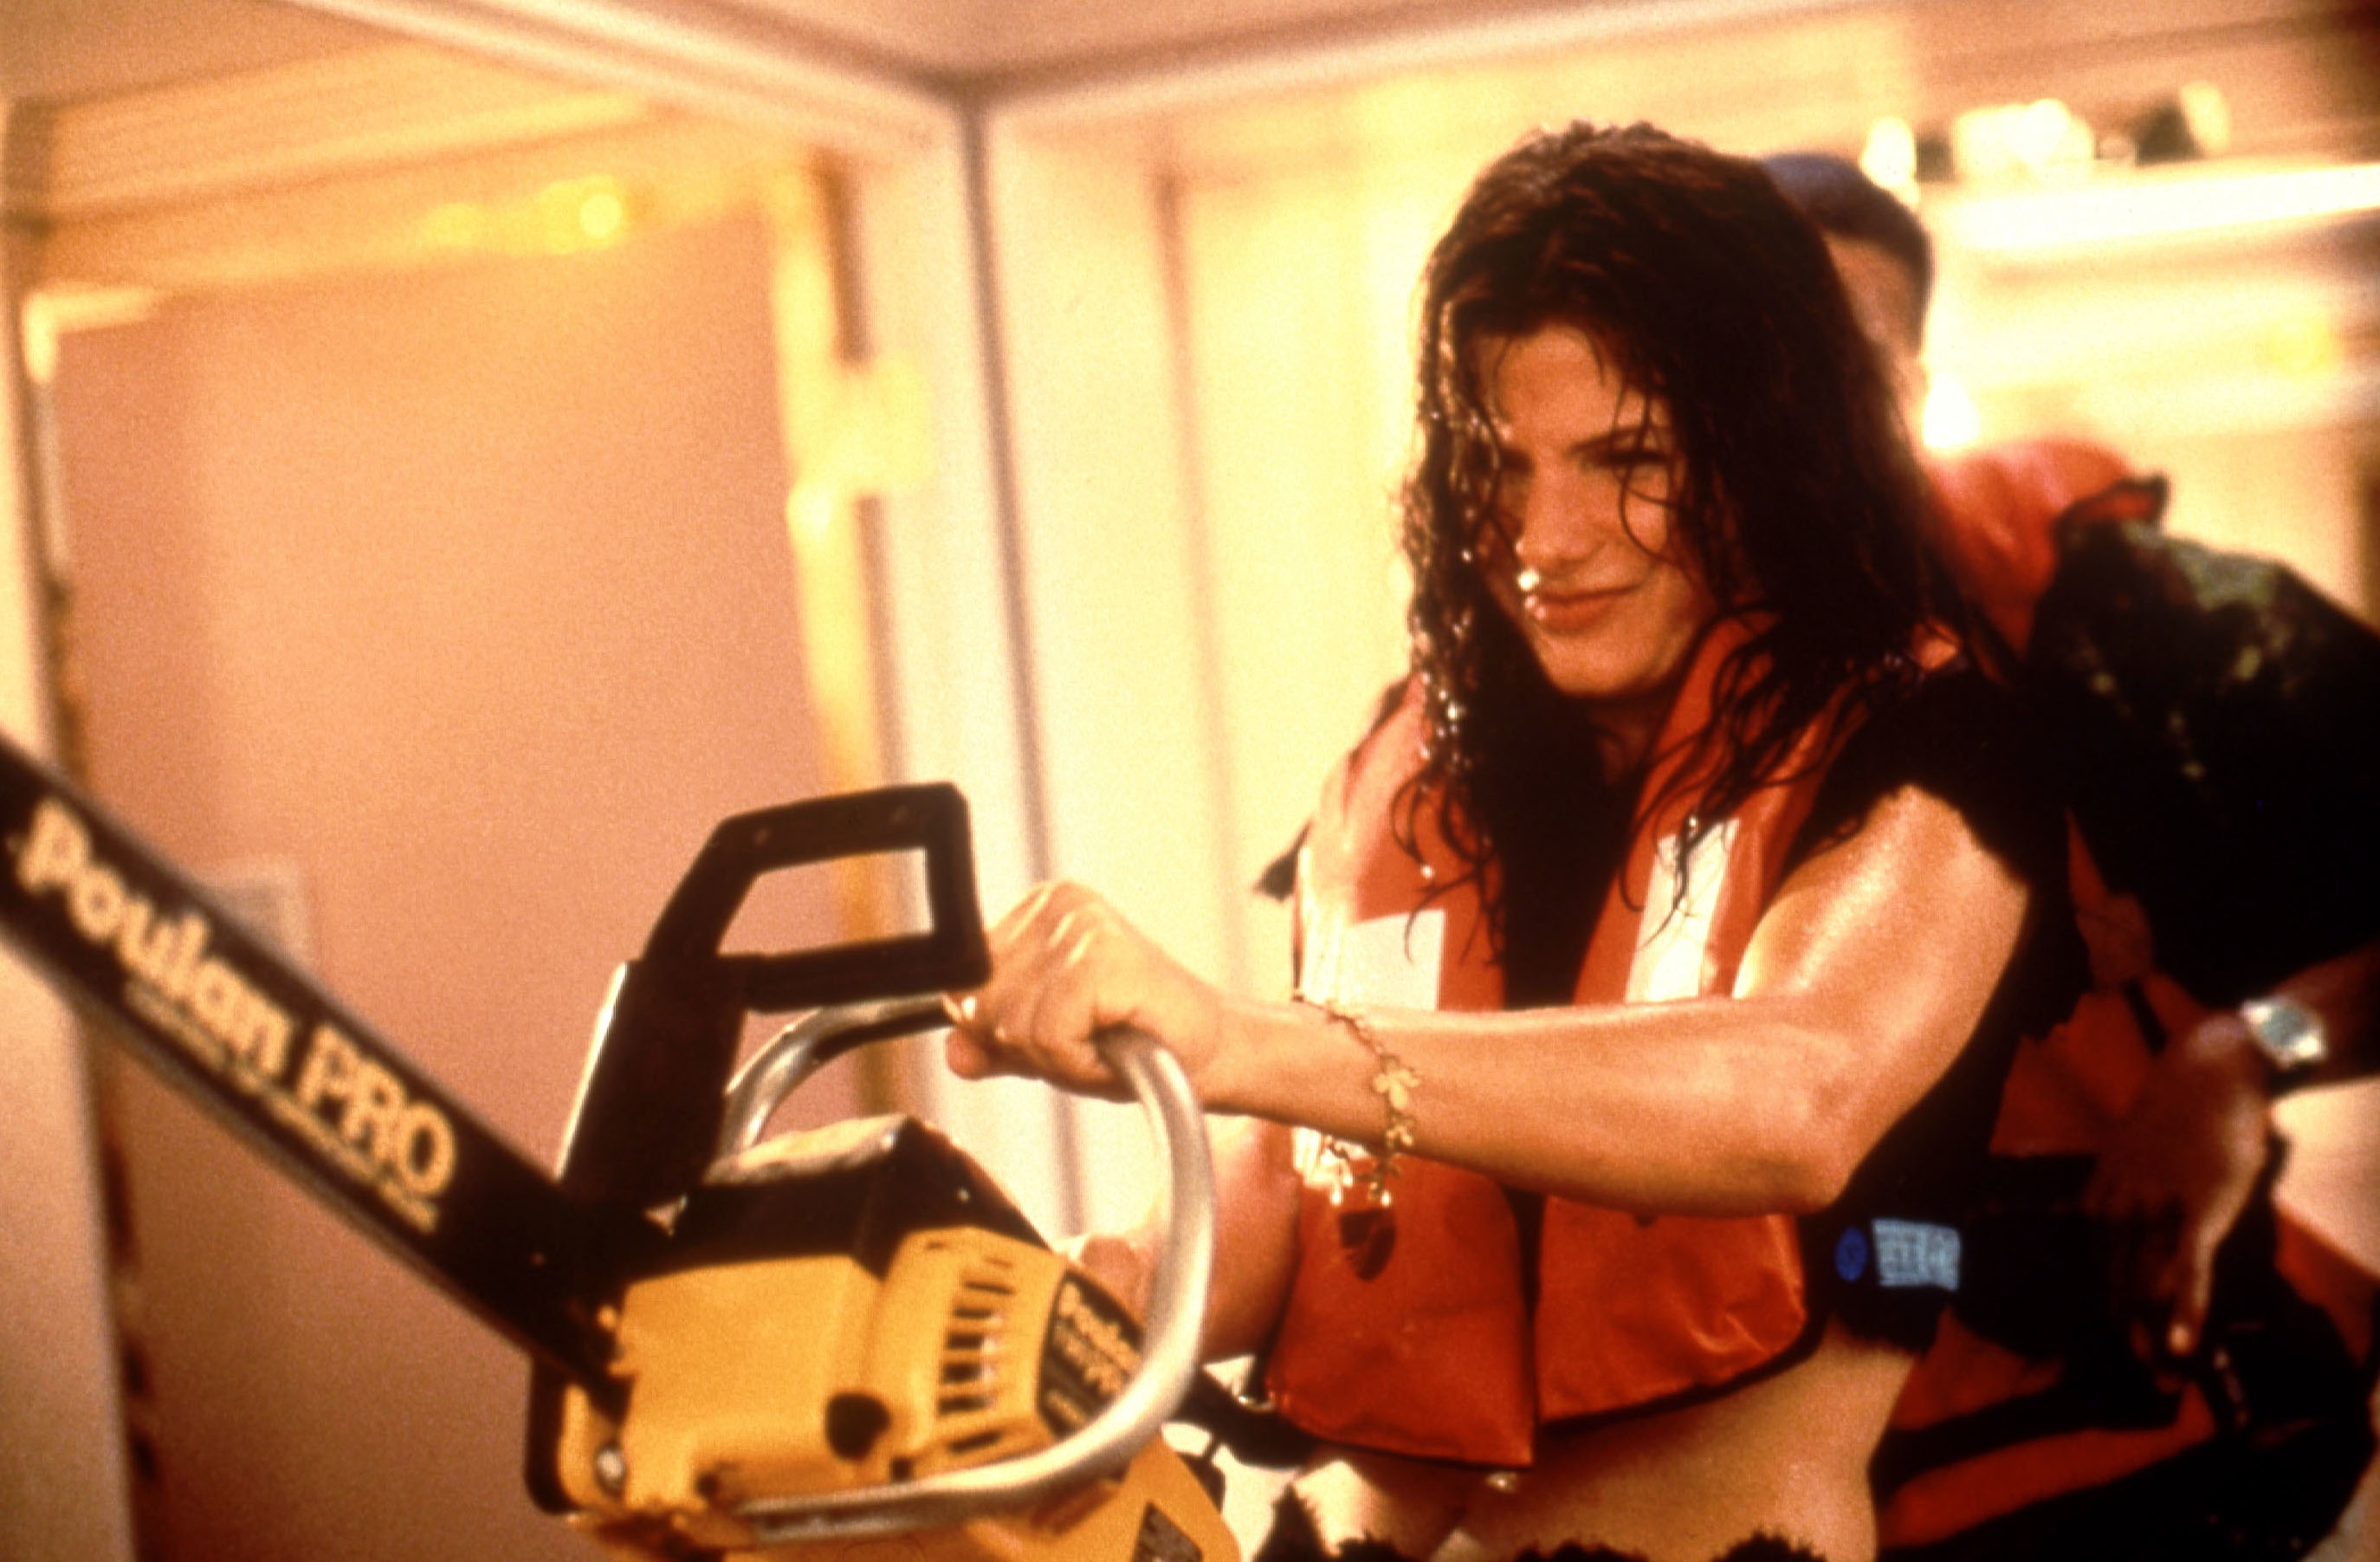 in a scene, Sandra holding a chainsaw, wearing a life jacket